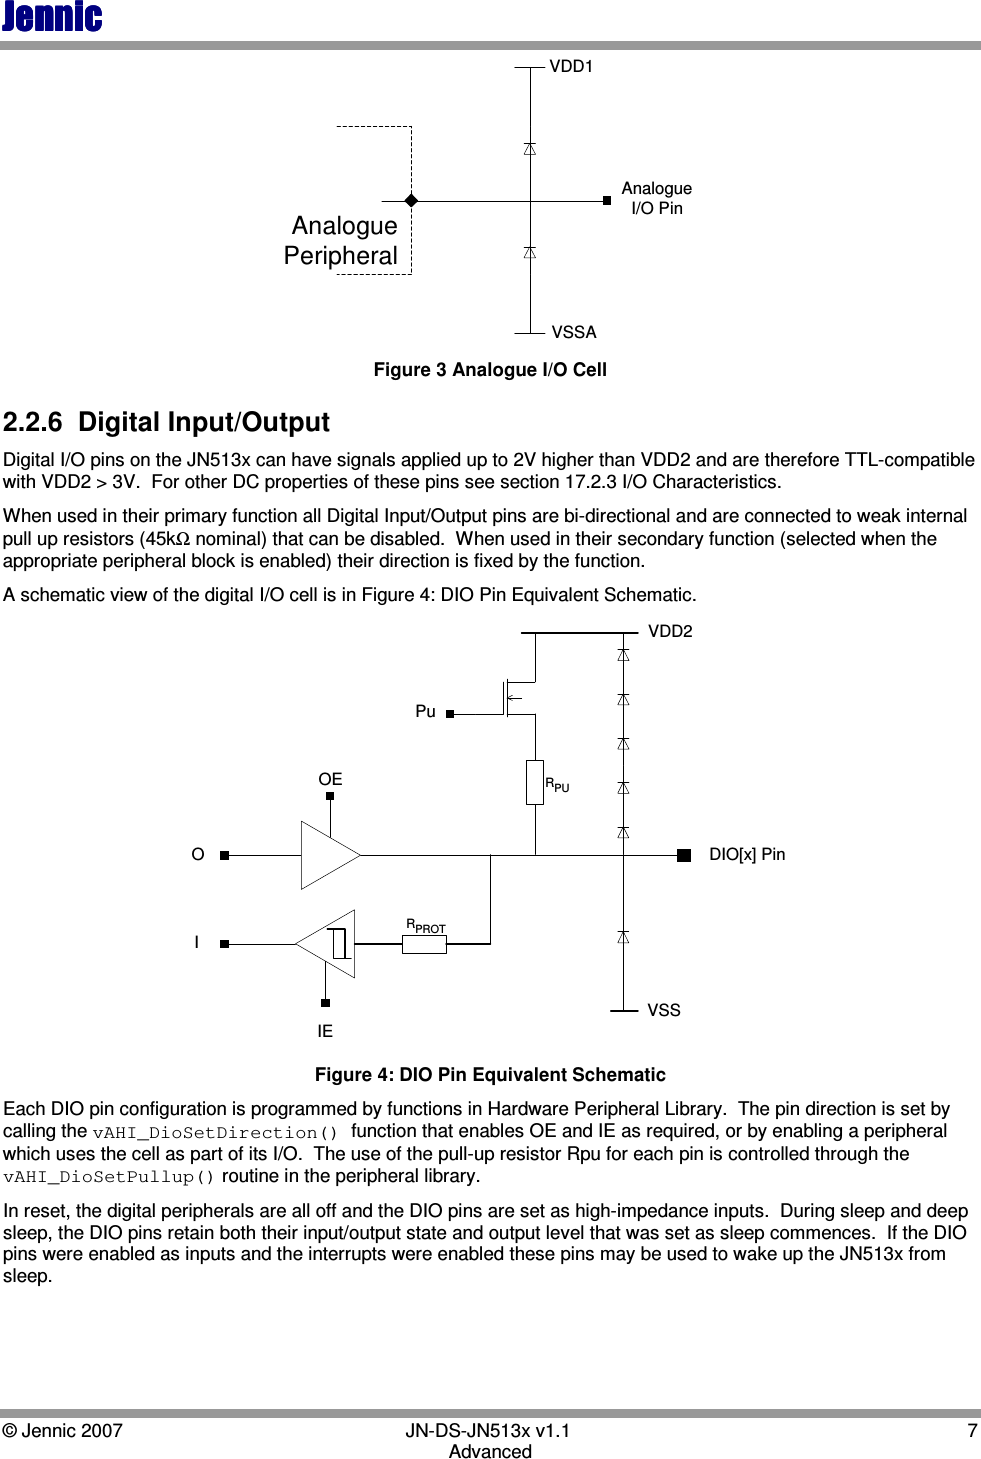 JennicJennicJennicJennic    © Jennic 2007        JN-DS-JN513x v1.1  7 Advanced VDD1AnalogueI/O PinVSSAAnaloguePeripheral Figure 3 Analogue I/O Cell 2.2.6  Digital Input/Output Digital I/O pins on the JN513x can have signals applied up to 2V higher than VDD2 and are therefore TTL-compatible with VDD2 &gt; 3V.  For other DC properties of these pins see section 17.2.3 I/O Characteristics. When used in their primary function all Digital Input/Output pins are bi-directional and are connected to weak internal pull up resistors (45kΩ nominal) that can be disabled.  When used in their secondary function (selected when the appropriate peripheral block is enabled) their direction is fixed by the function. A schematic view of the digital I/O cell is in Figure 4: DIO Pin Equivalent Schematic. IOIEVDD2VSSPuRPURPROTOEDIO[x] Pin Figure 4: DIO Pin Equivalent Schematic Each DIO pin configuration is programmed by functions in Hardware Peripheral Library.  The pin direction is set by calling the vAHI_DioSetDirection() function that enables OE and IE as required, or by enabling a peripheral which uses the cell as part of its I/O.  The use of the pull-up resistor Rpu for each pin is controlled through the vAHI_DioSetPullup() routine in the peripheral library. In reset, the digital peripherals are all off and the DIO pins are set as high-impedance inputs.  During sleep and deep sleep, the DIO pins retain both their input/output state and output level that was set as sleep commences.  If the DIO pins were enabled as inputs and the interrupts were enabled these pins may be used to wake up the JN513x from sleep.  